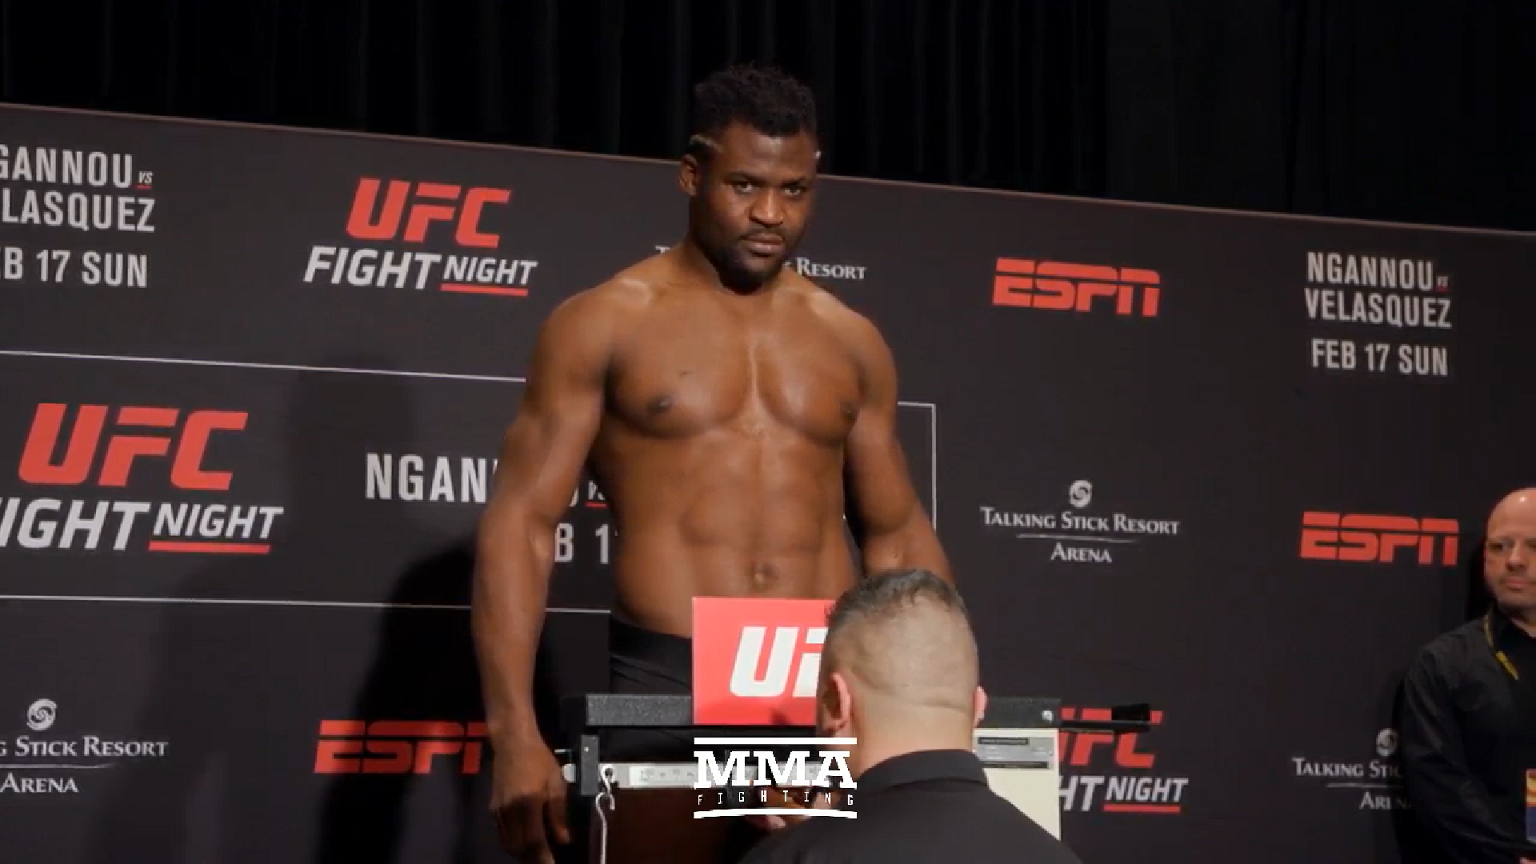 UFC full fight video Francis Ngannou takes out Alistair Overeem with monster uppercut